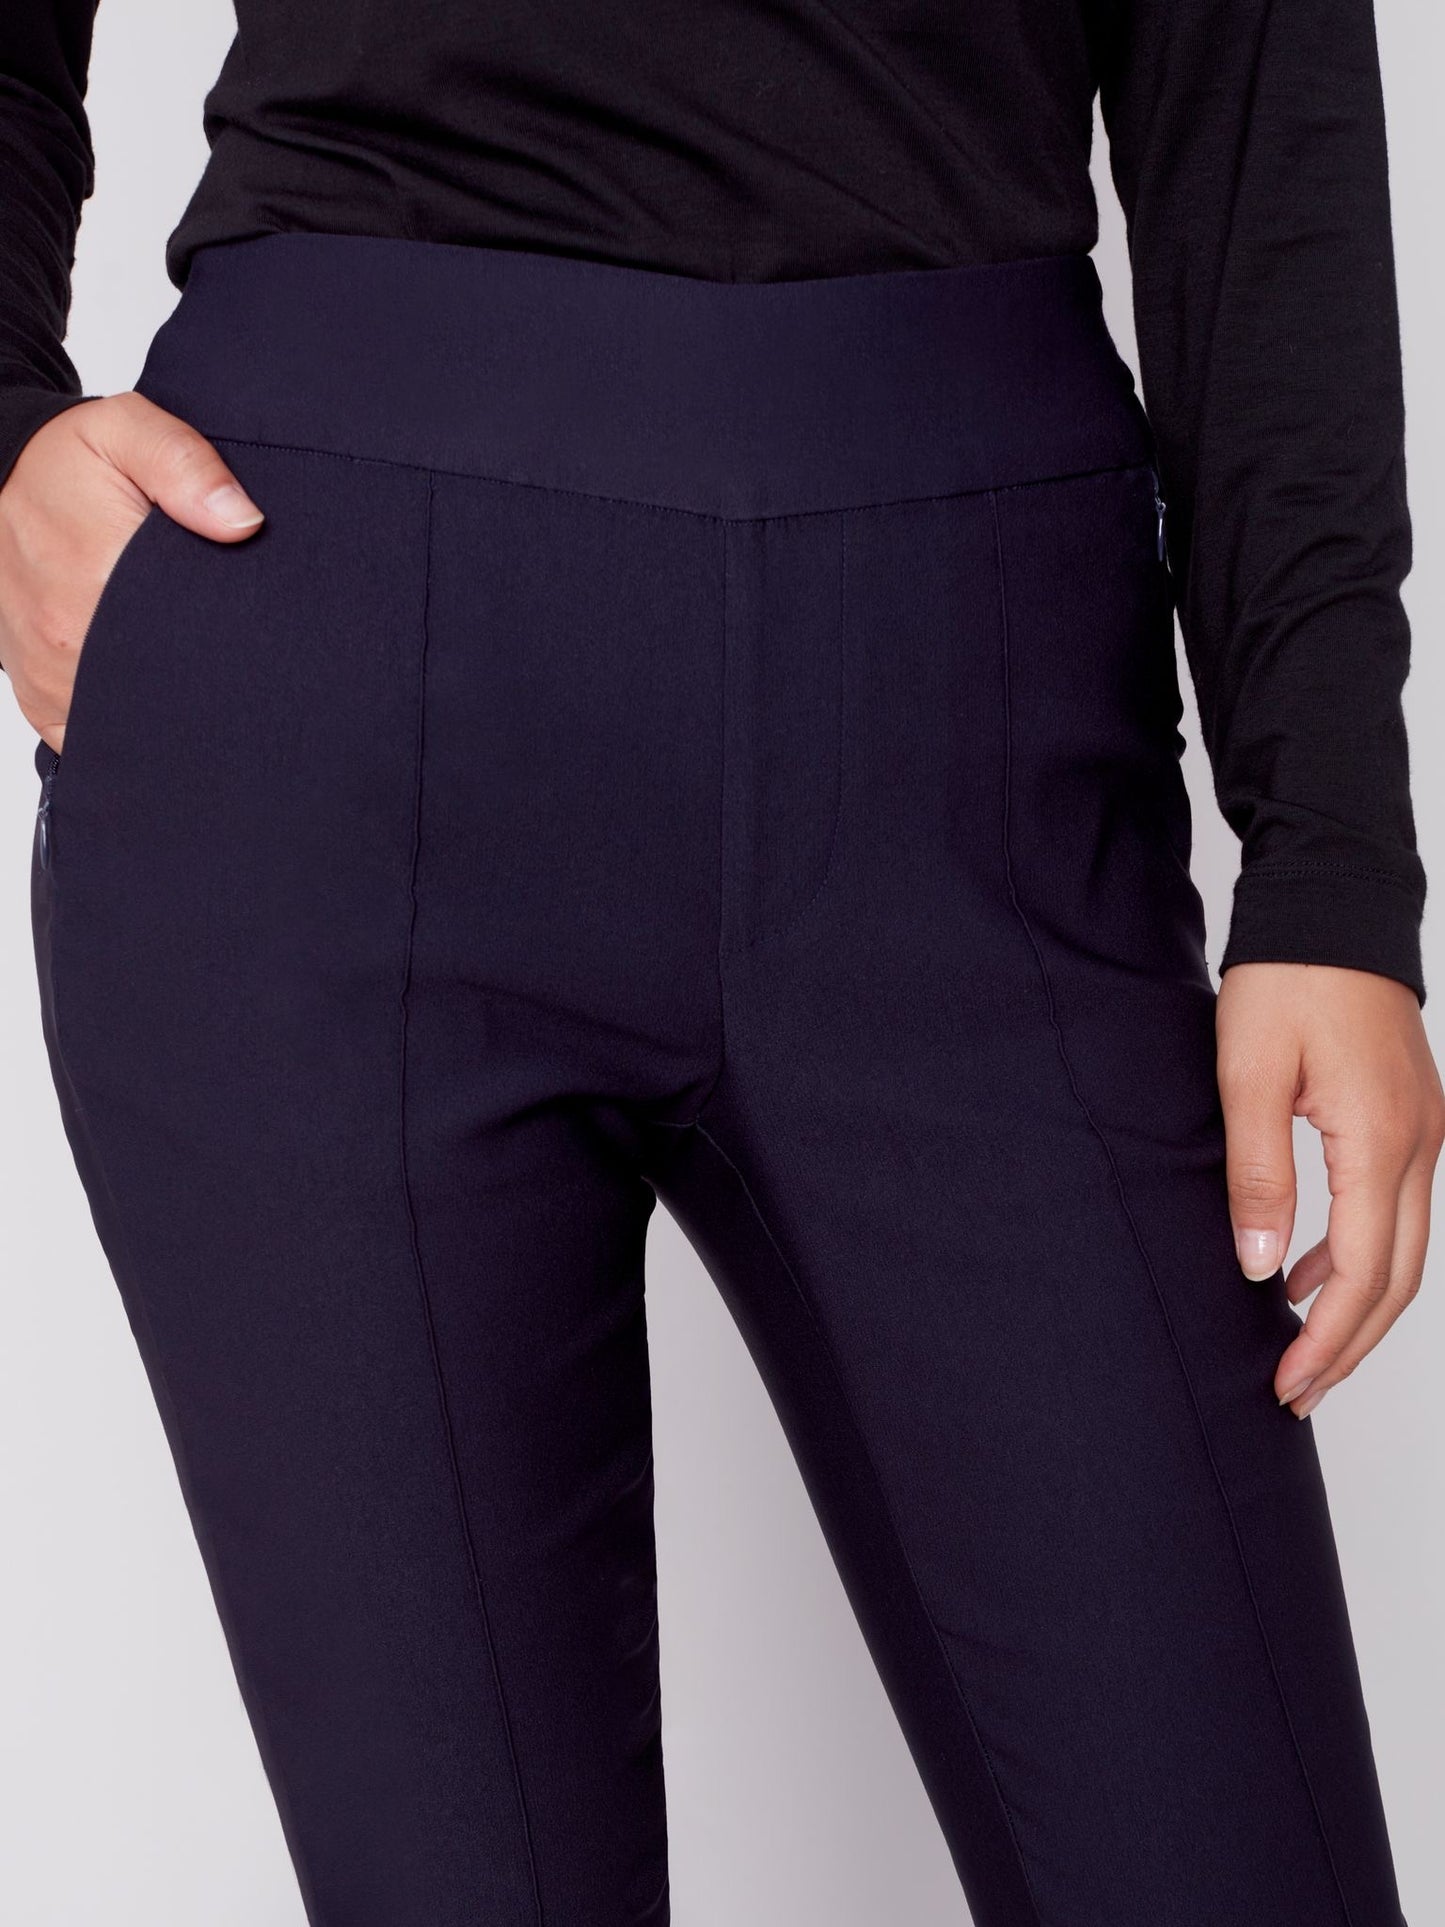 CB Smooth Stretch Pull on Pant